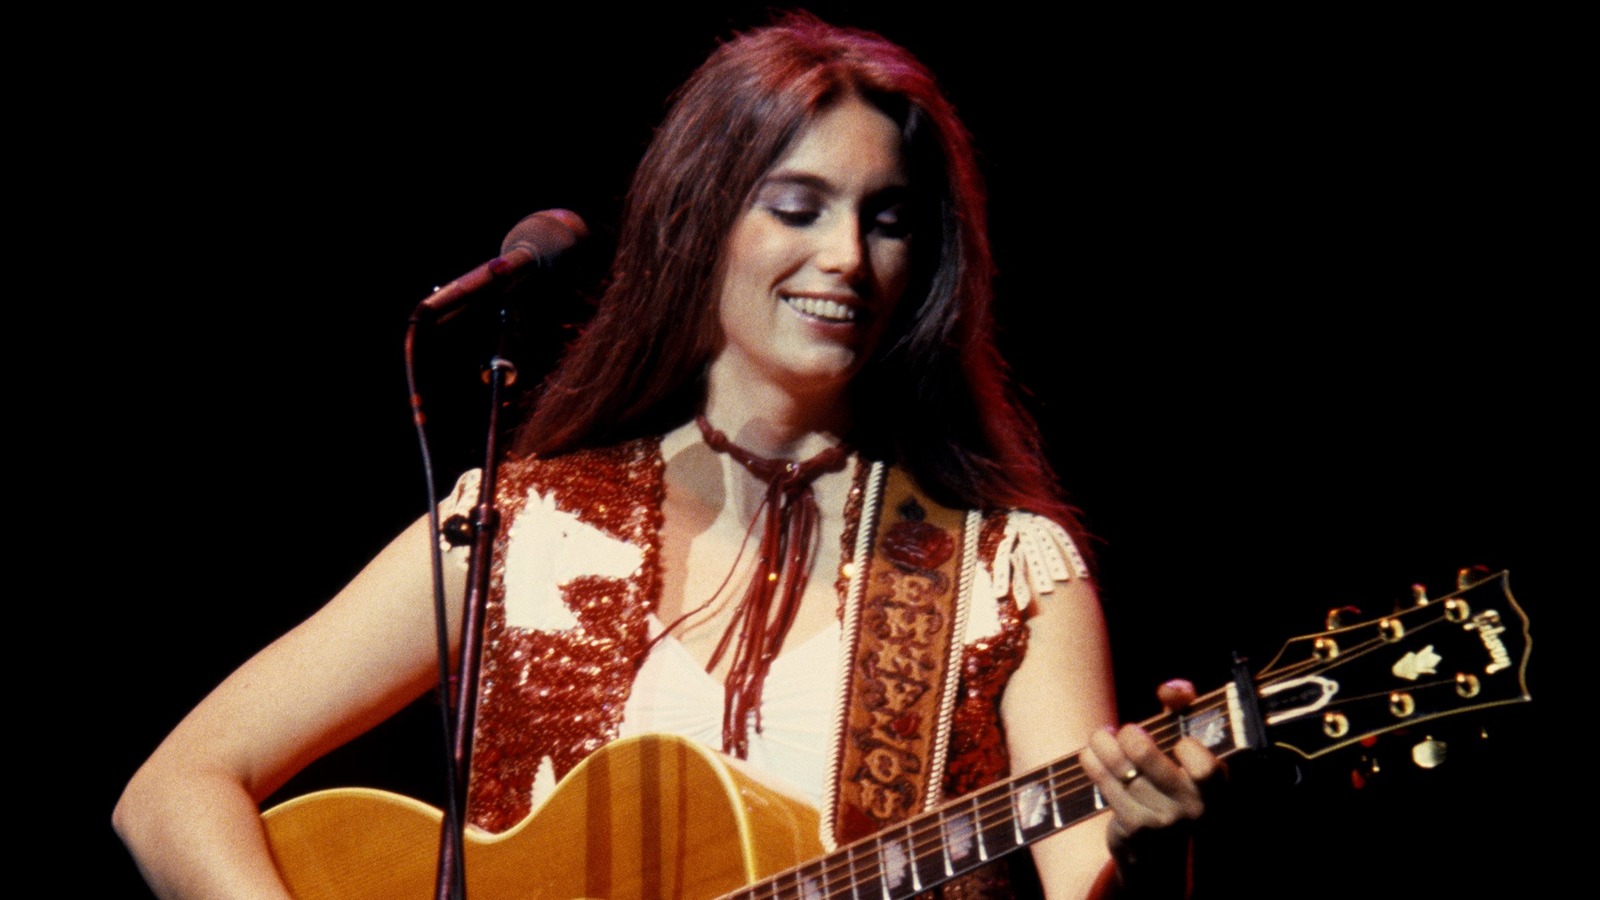 Related image of Emmylou Harris.